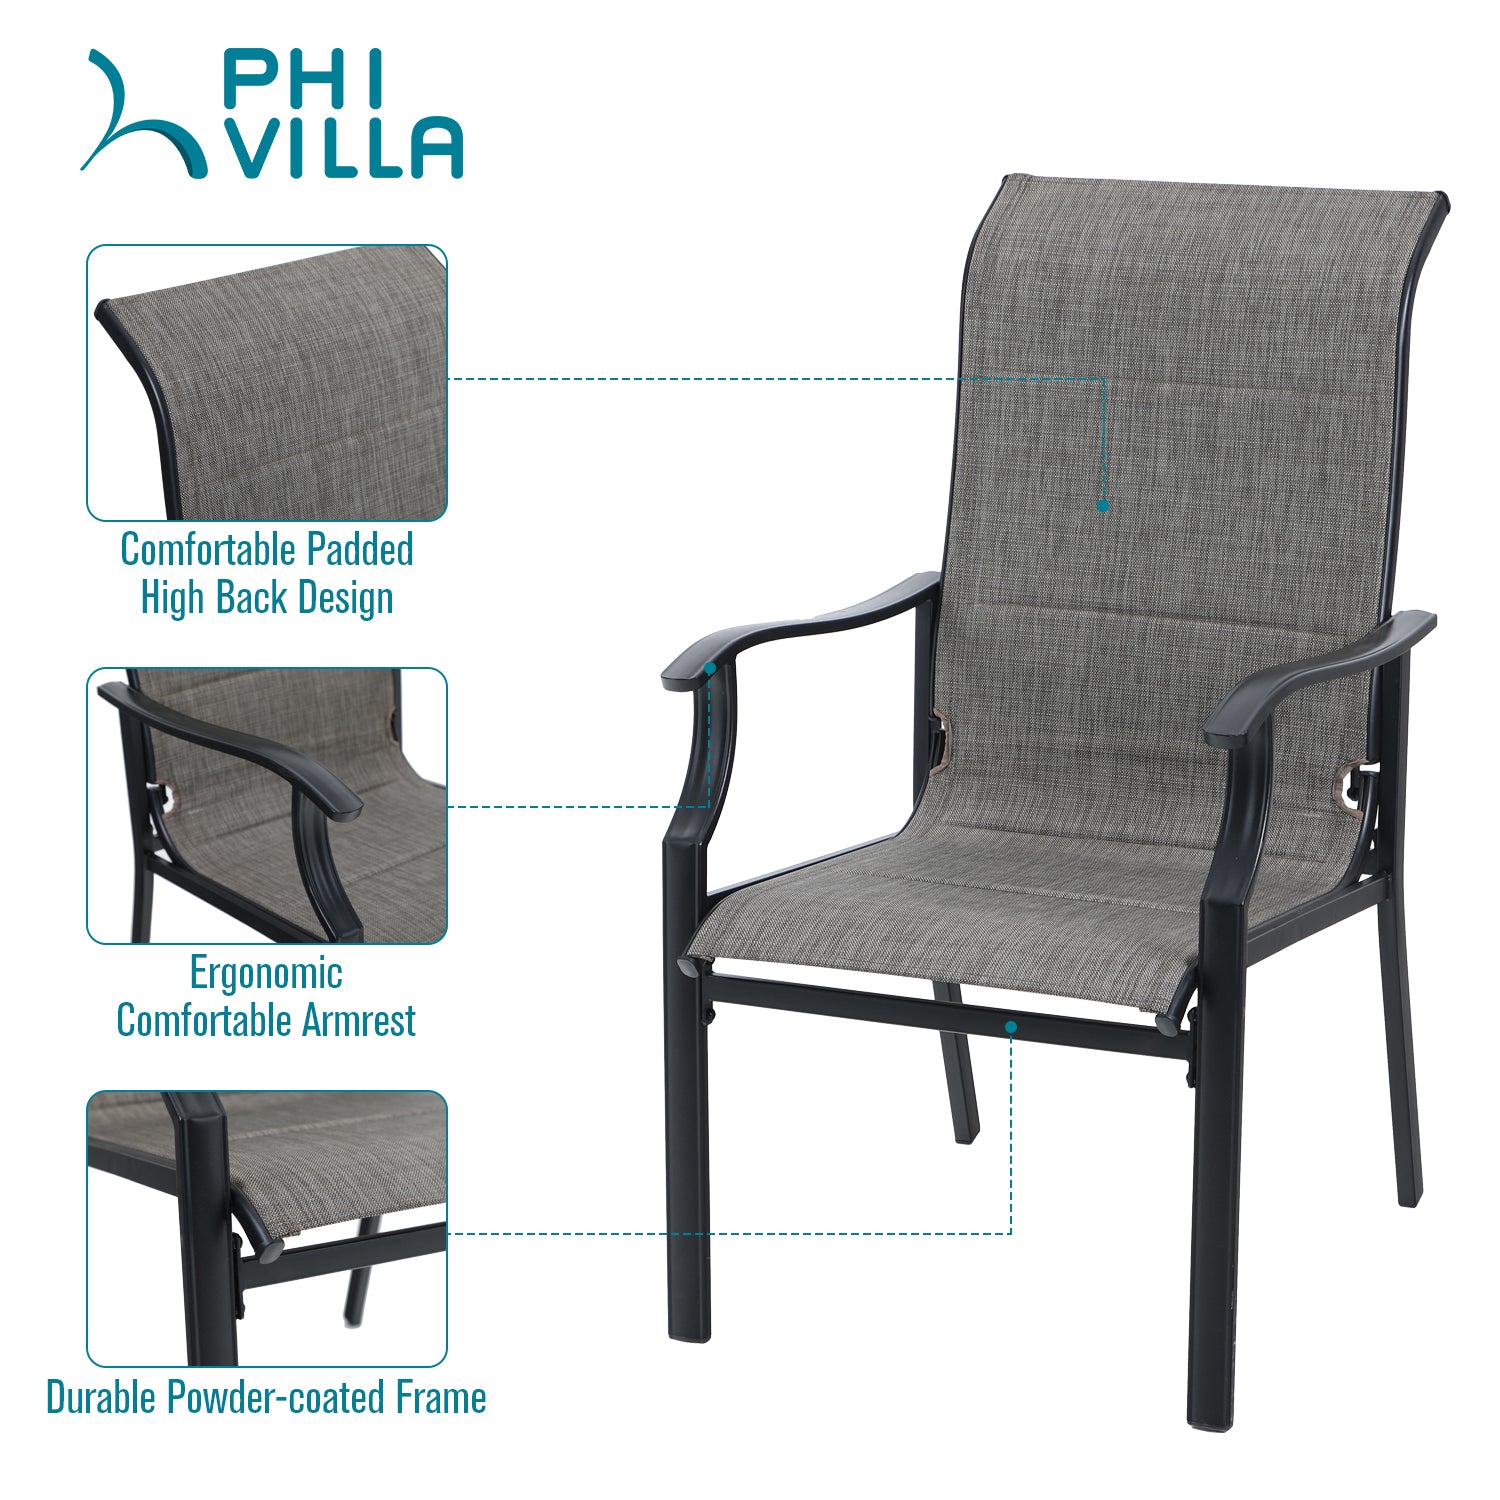 PHI VILLA 7-Piece Patio Dining Set Padded Textilene Chairs with Wave Arms & Steel Panel Table